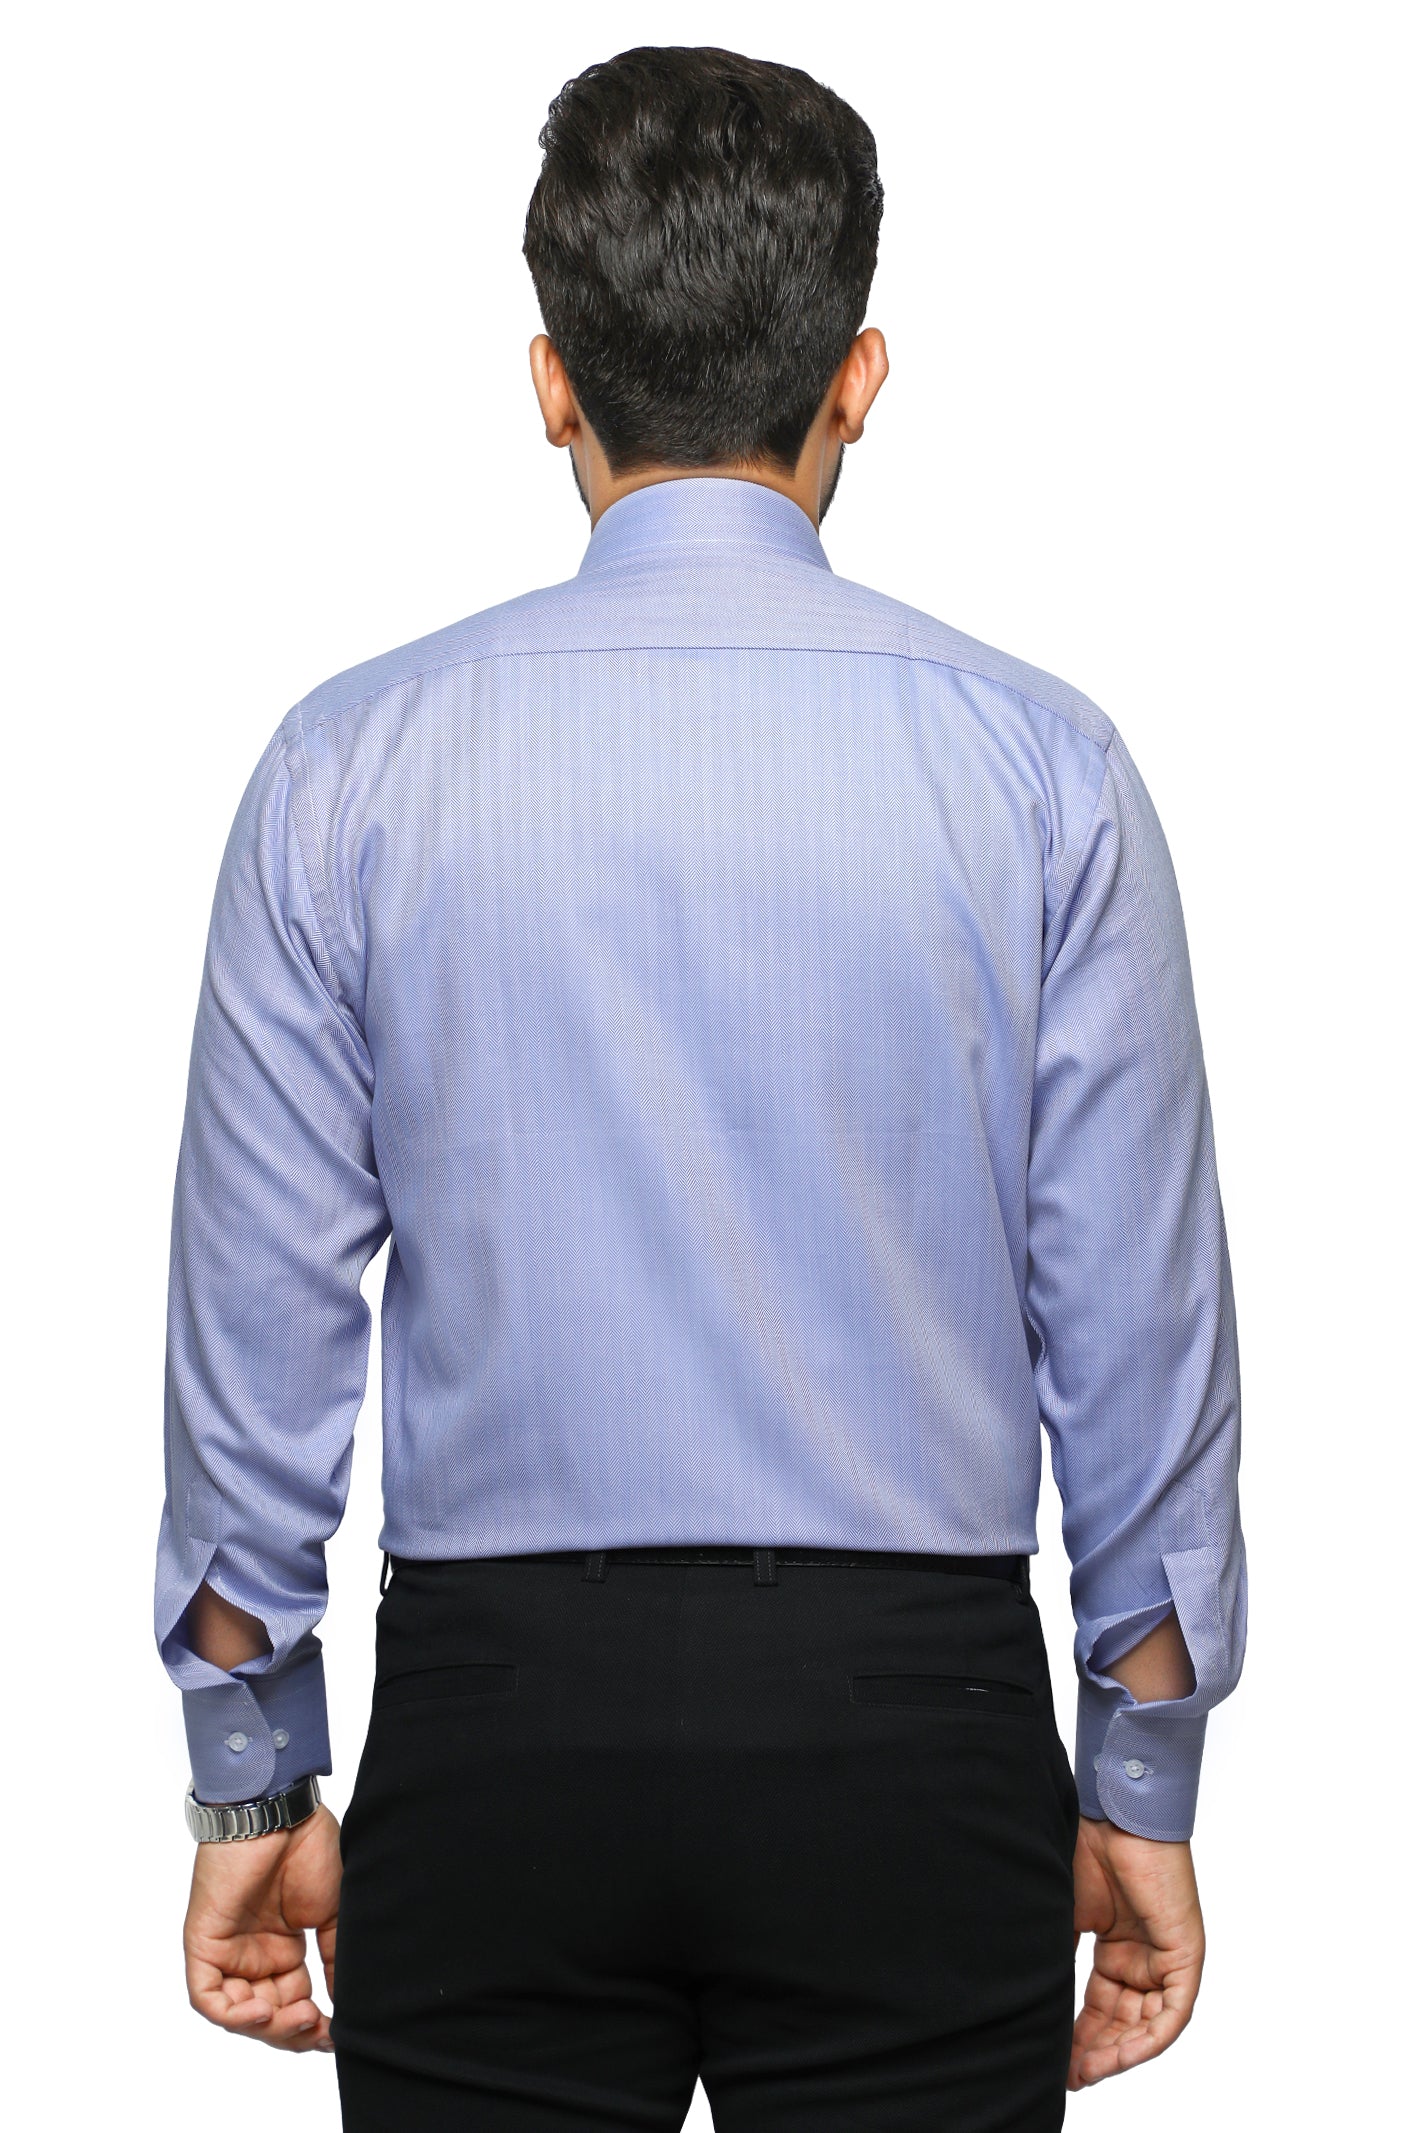 Formal Man Shirt in Blue AB19371 - Diners